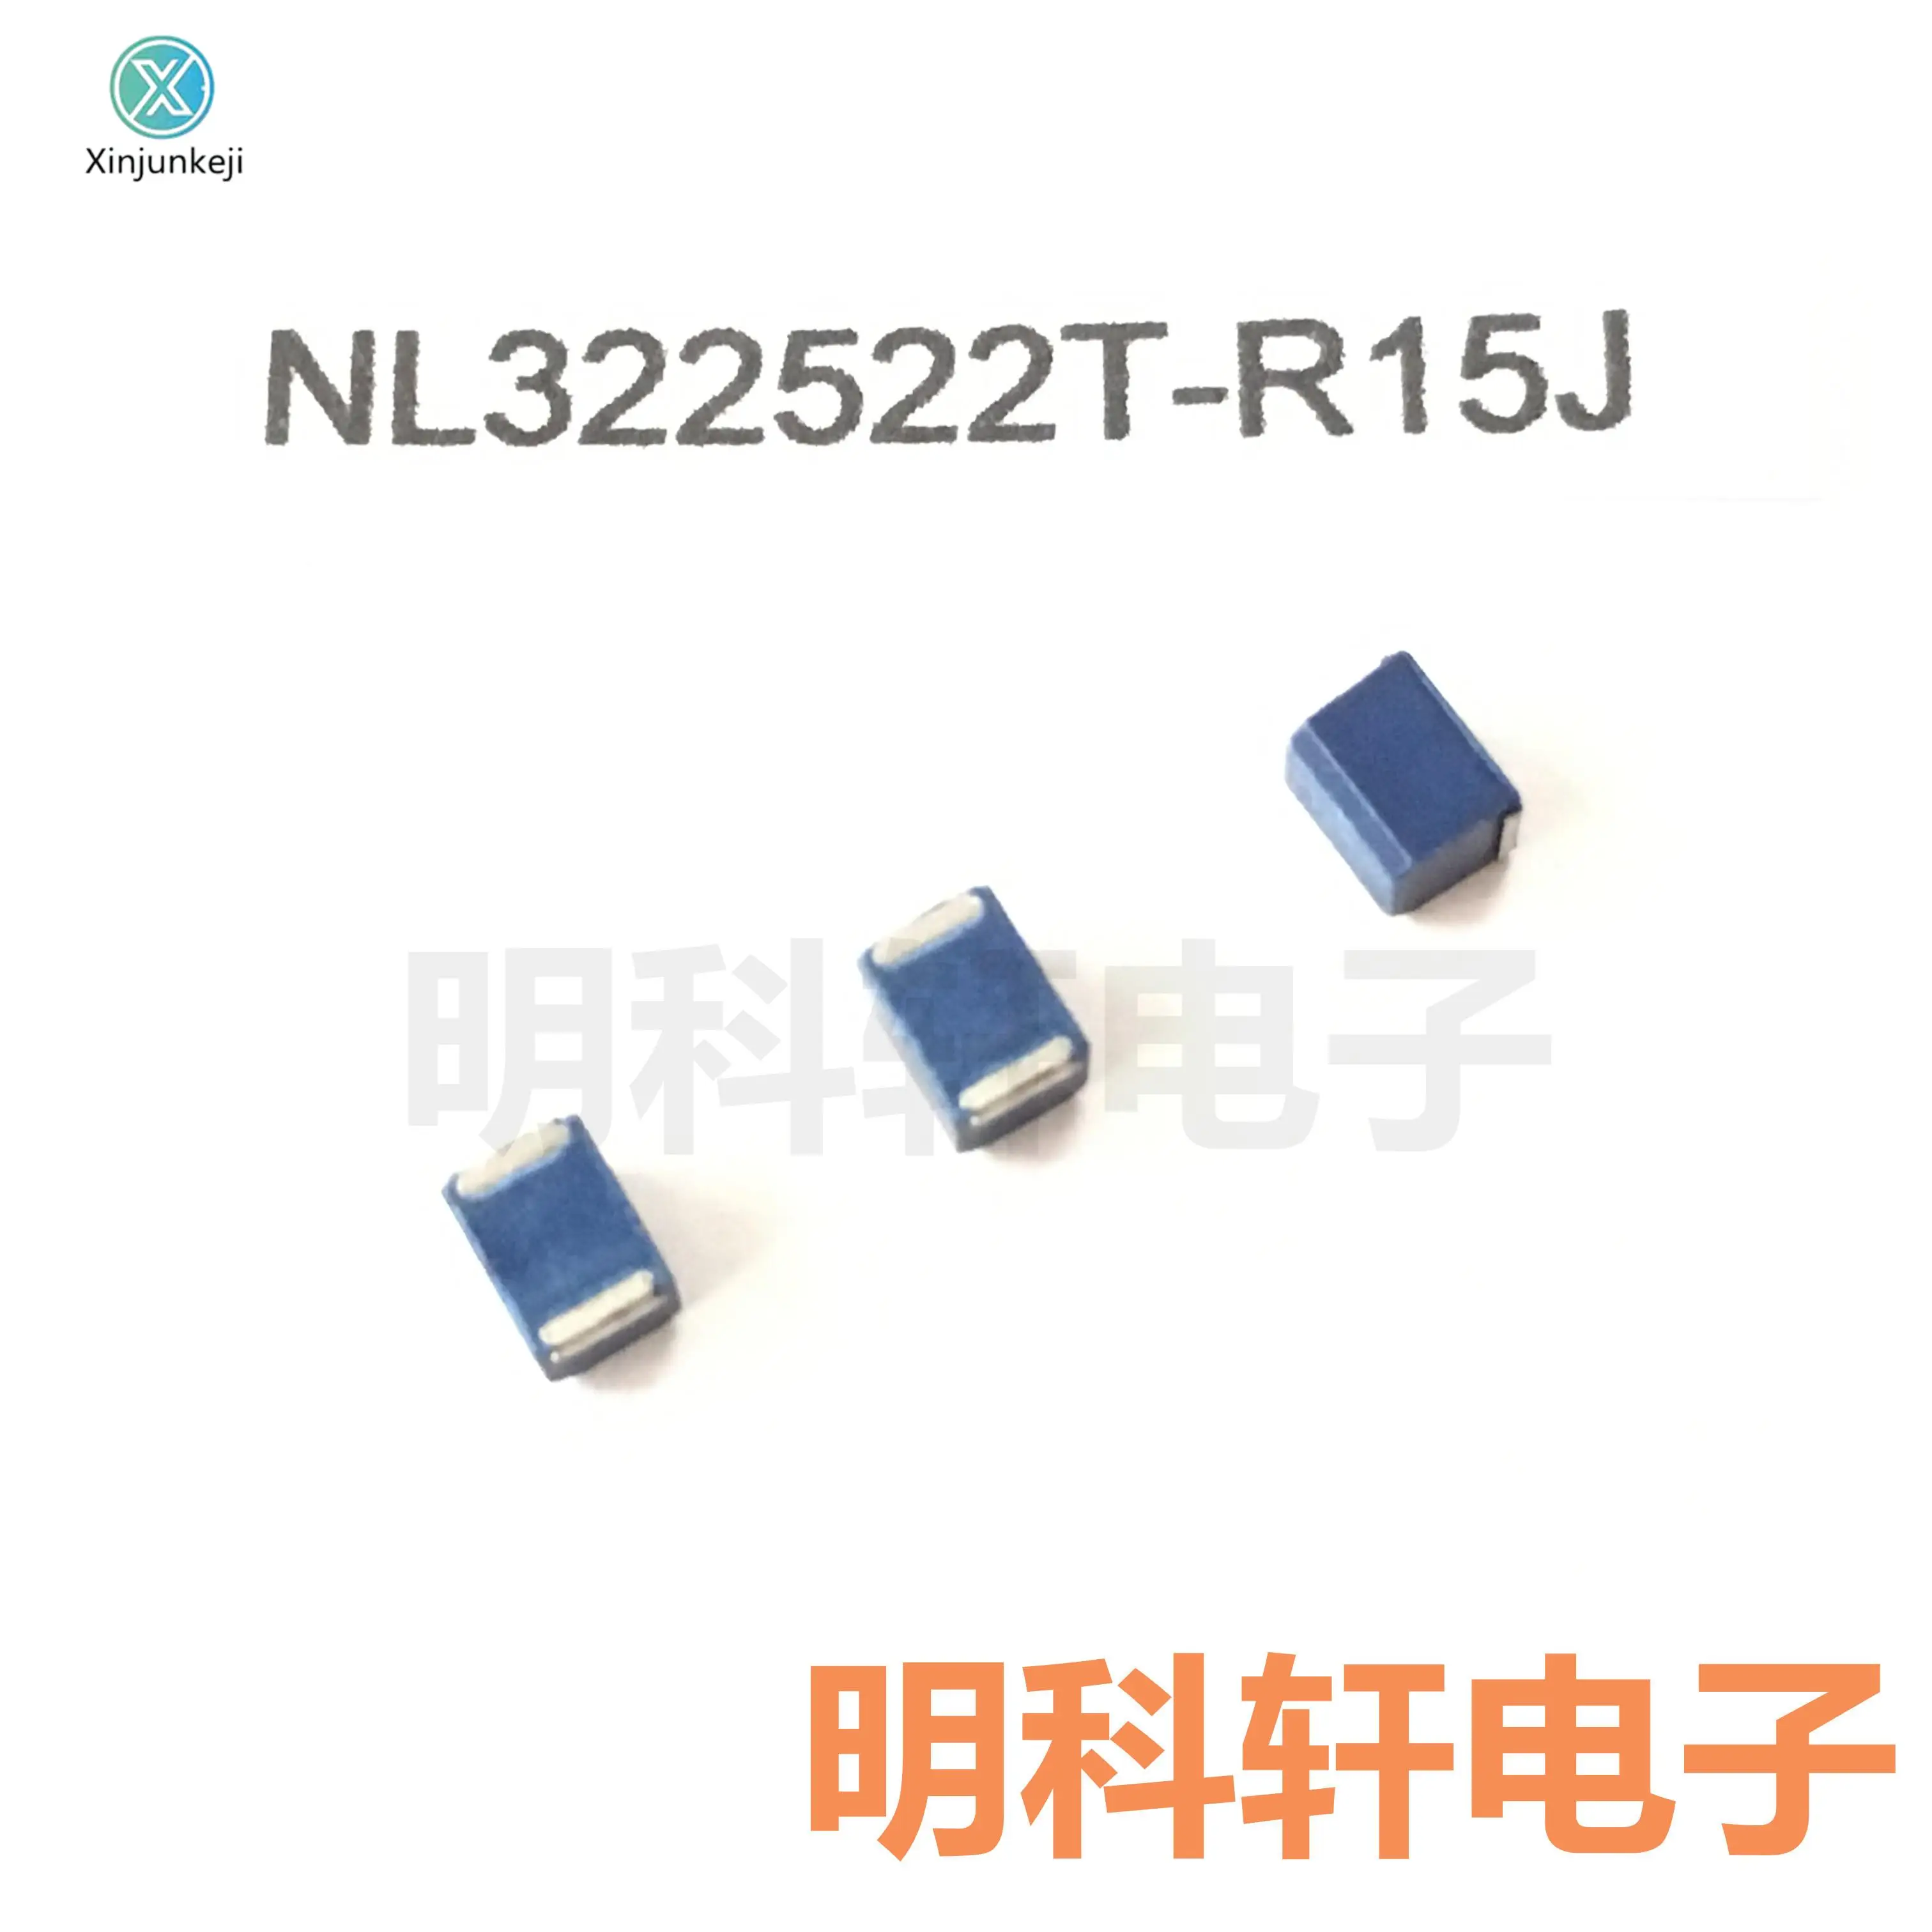 

50pcs orginal new NL322522T-R15J SMD wire wound inductor 1210 0.15UH 150NH